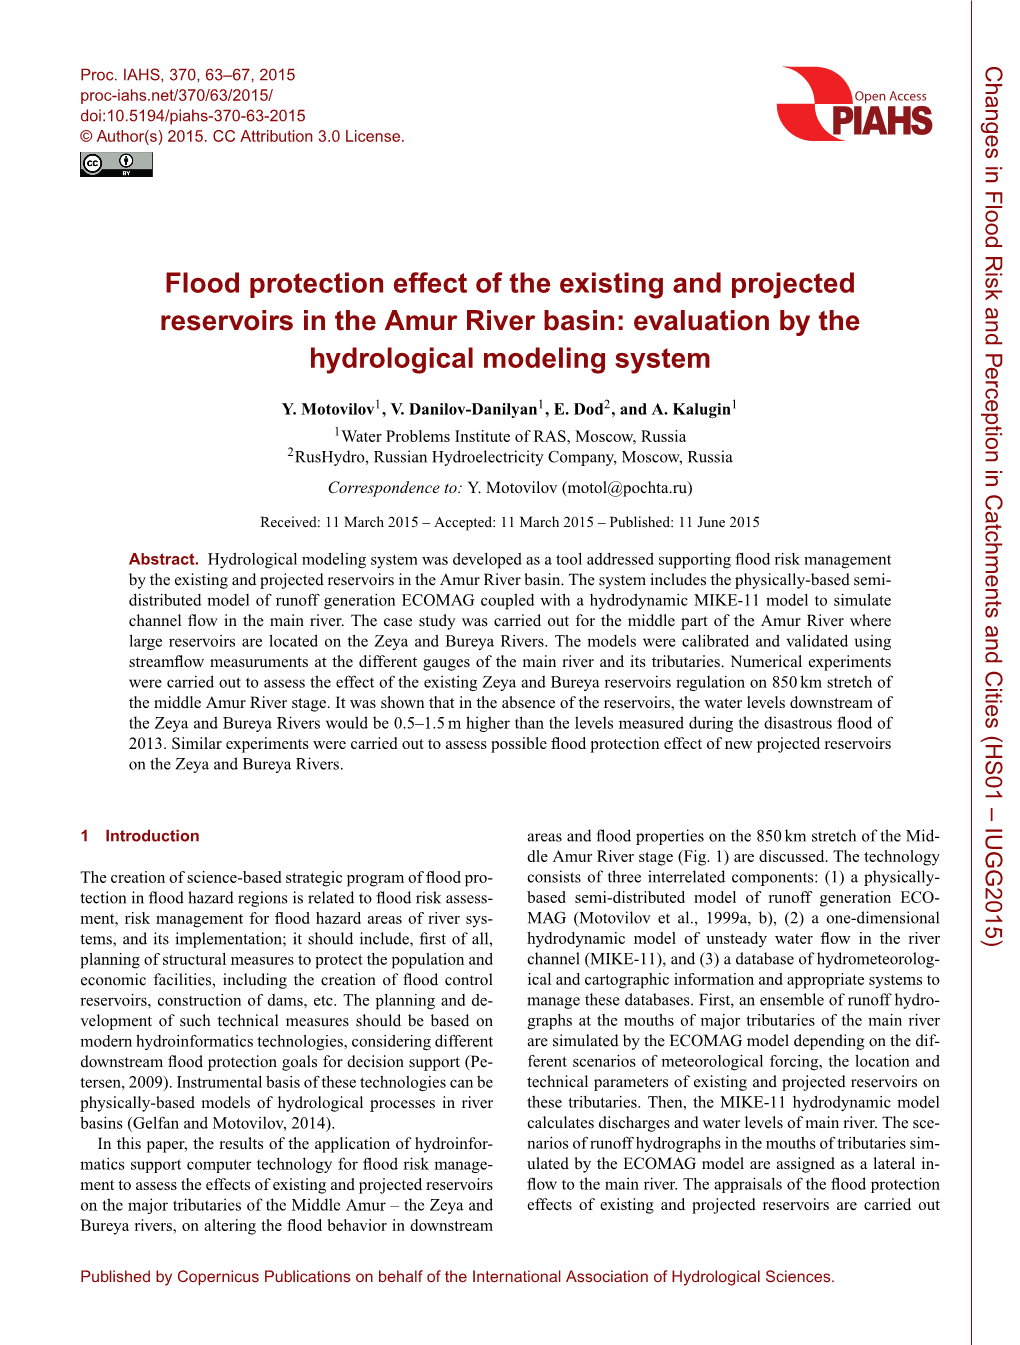 Flood Protection Effect of the Existing and Projected Reservoirs in the Amur River Basin: Evaluation by the Hydrological Modeling System